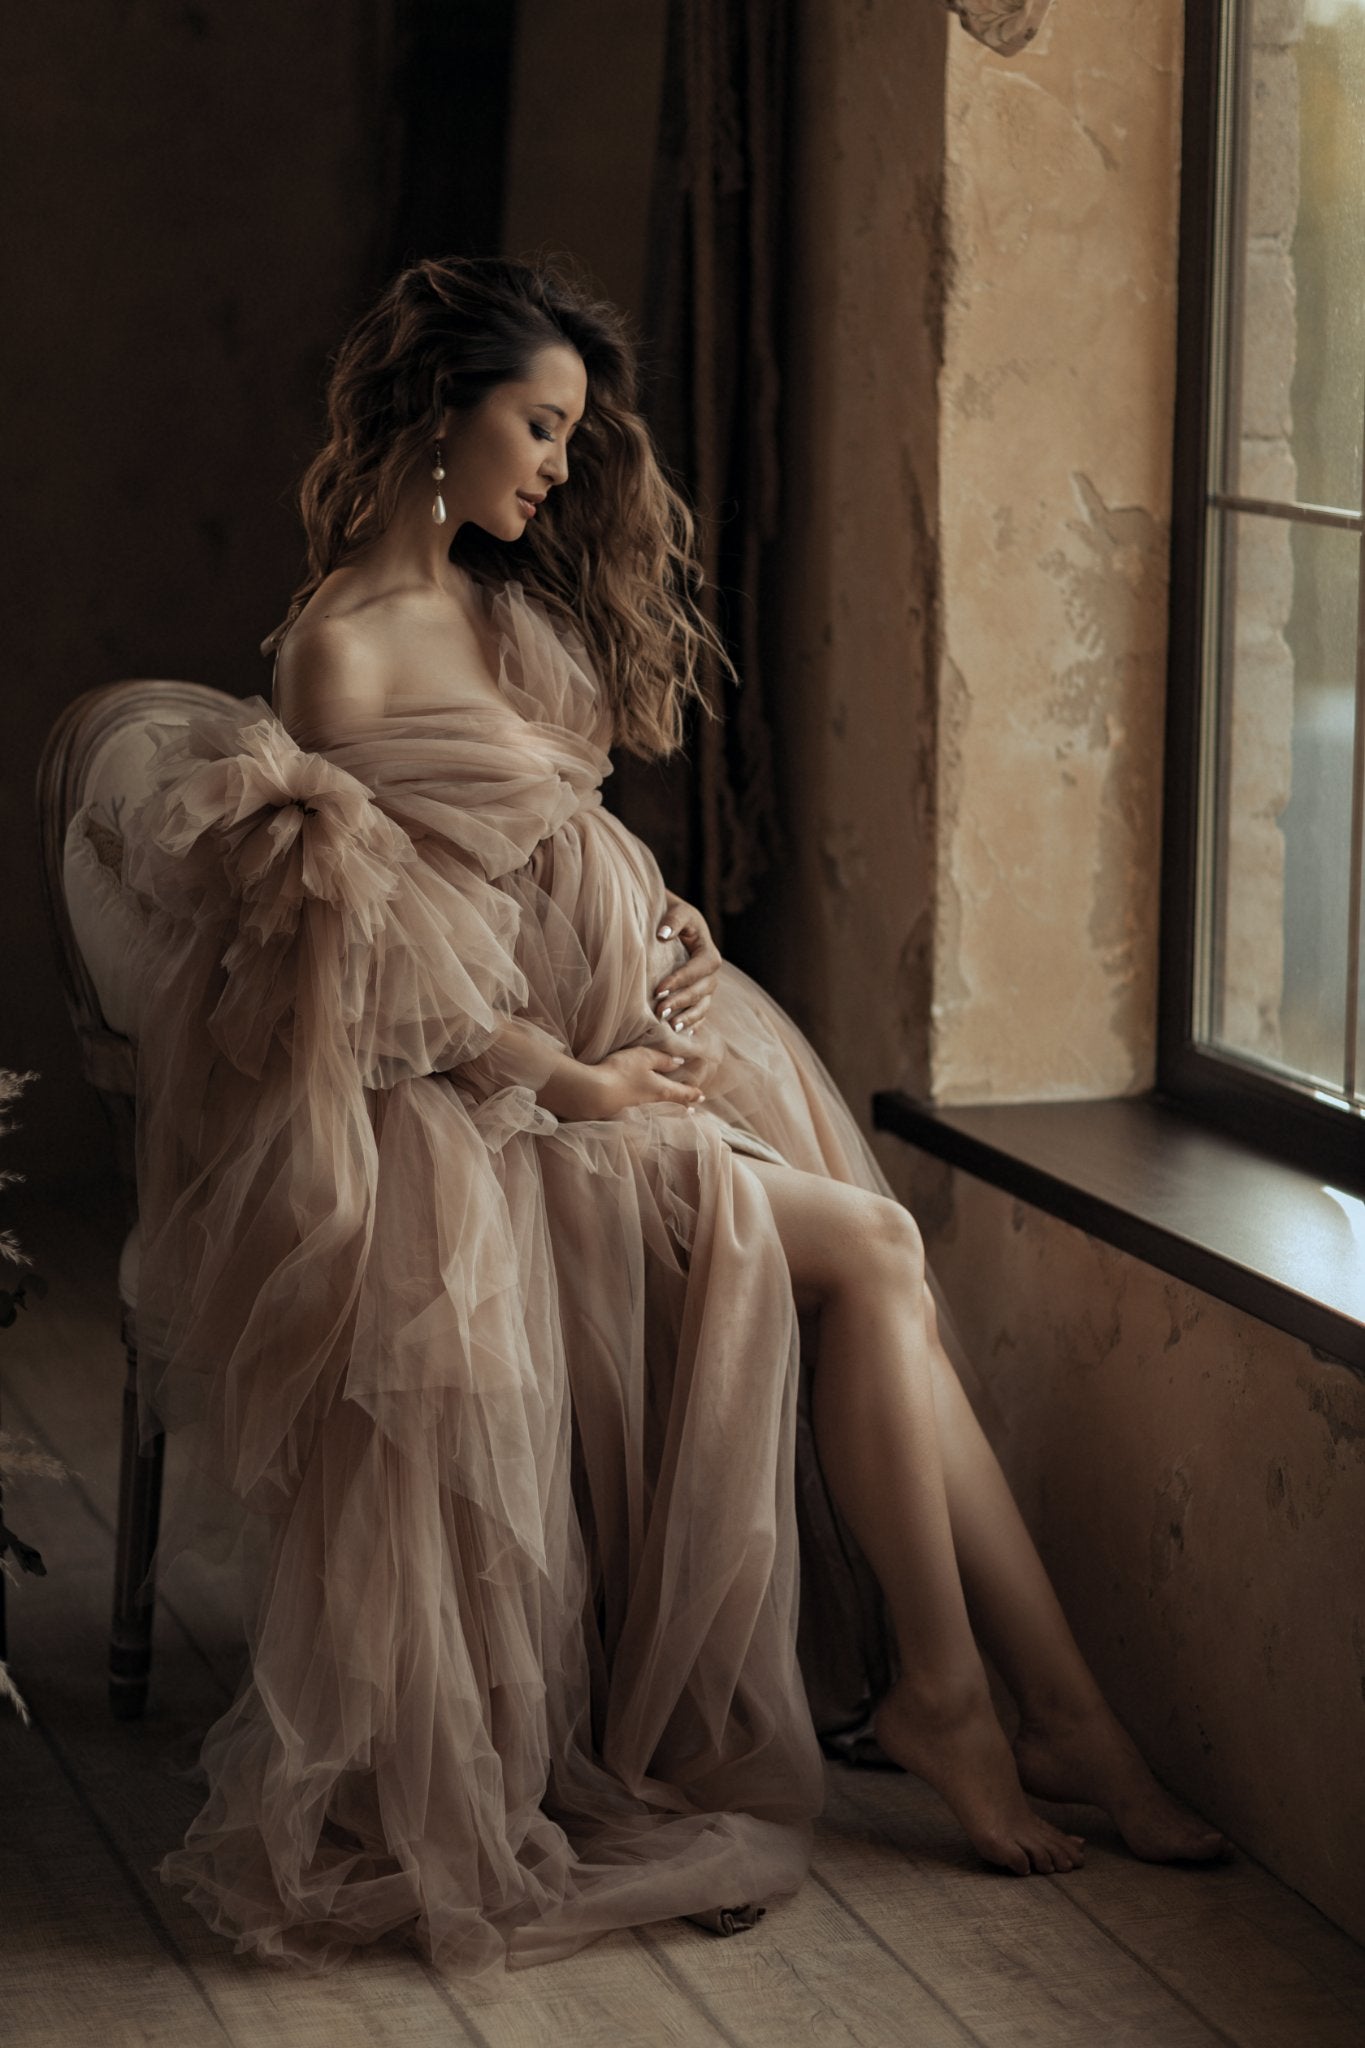 Sand Serena Gown - maternity photoshoot dress